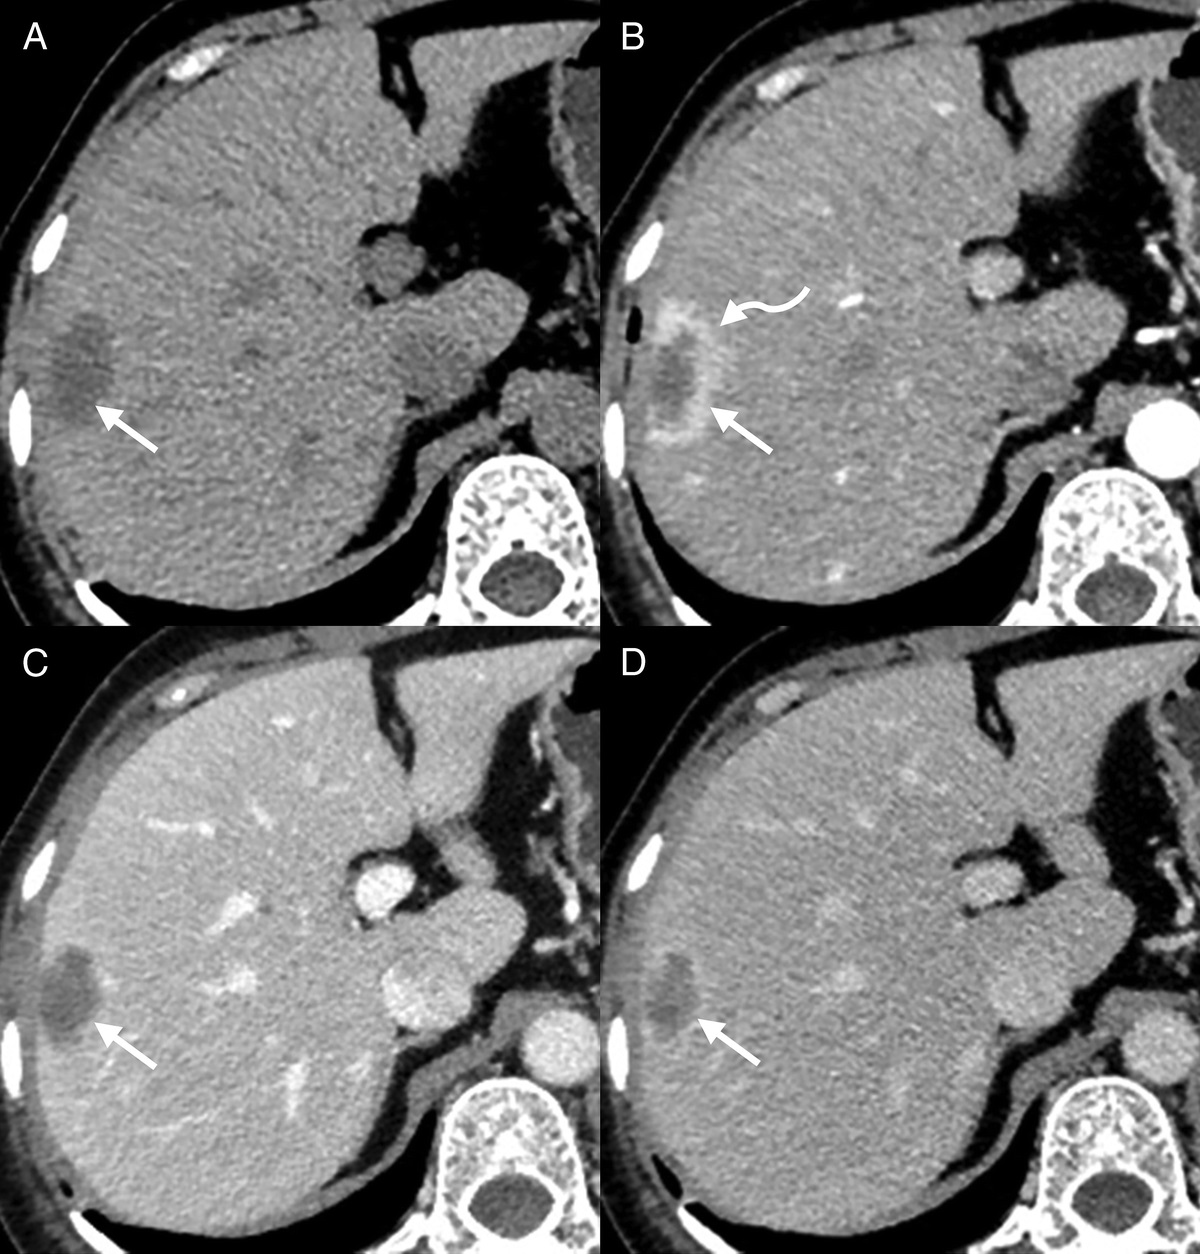 68Ga-FAPI-04 Detected Hepatic Arteriovenous Malformation in a Patient With IgA Nephropathy